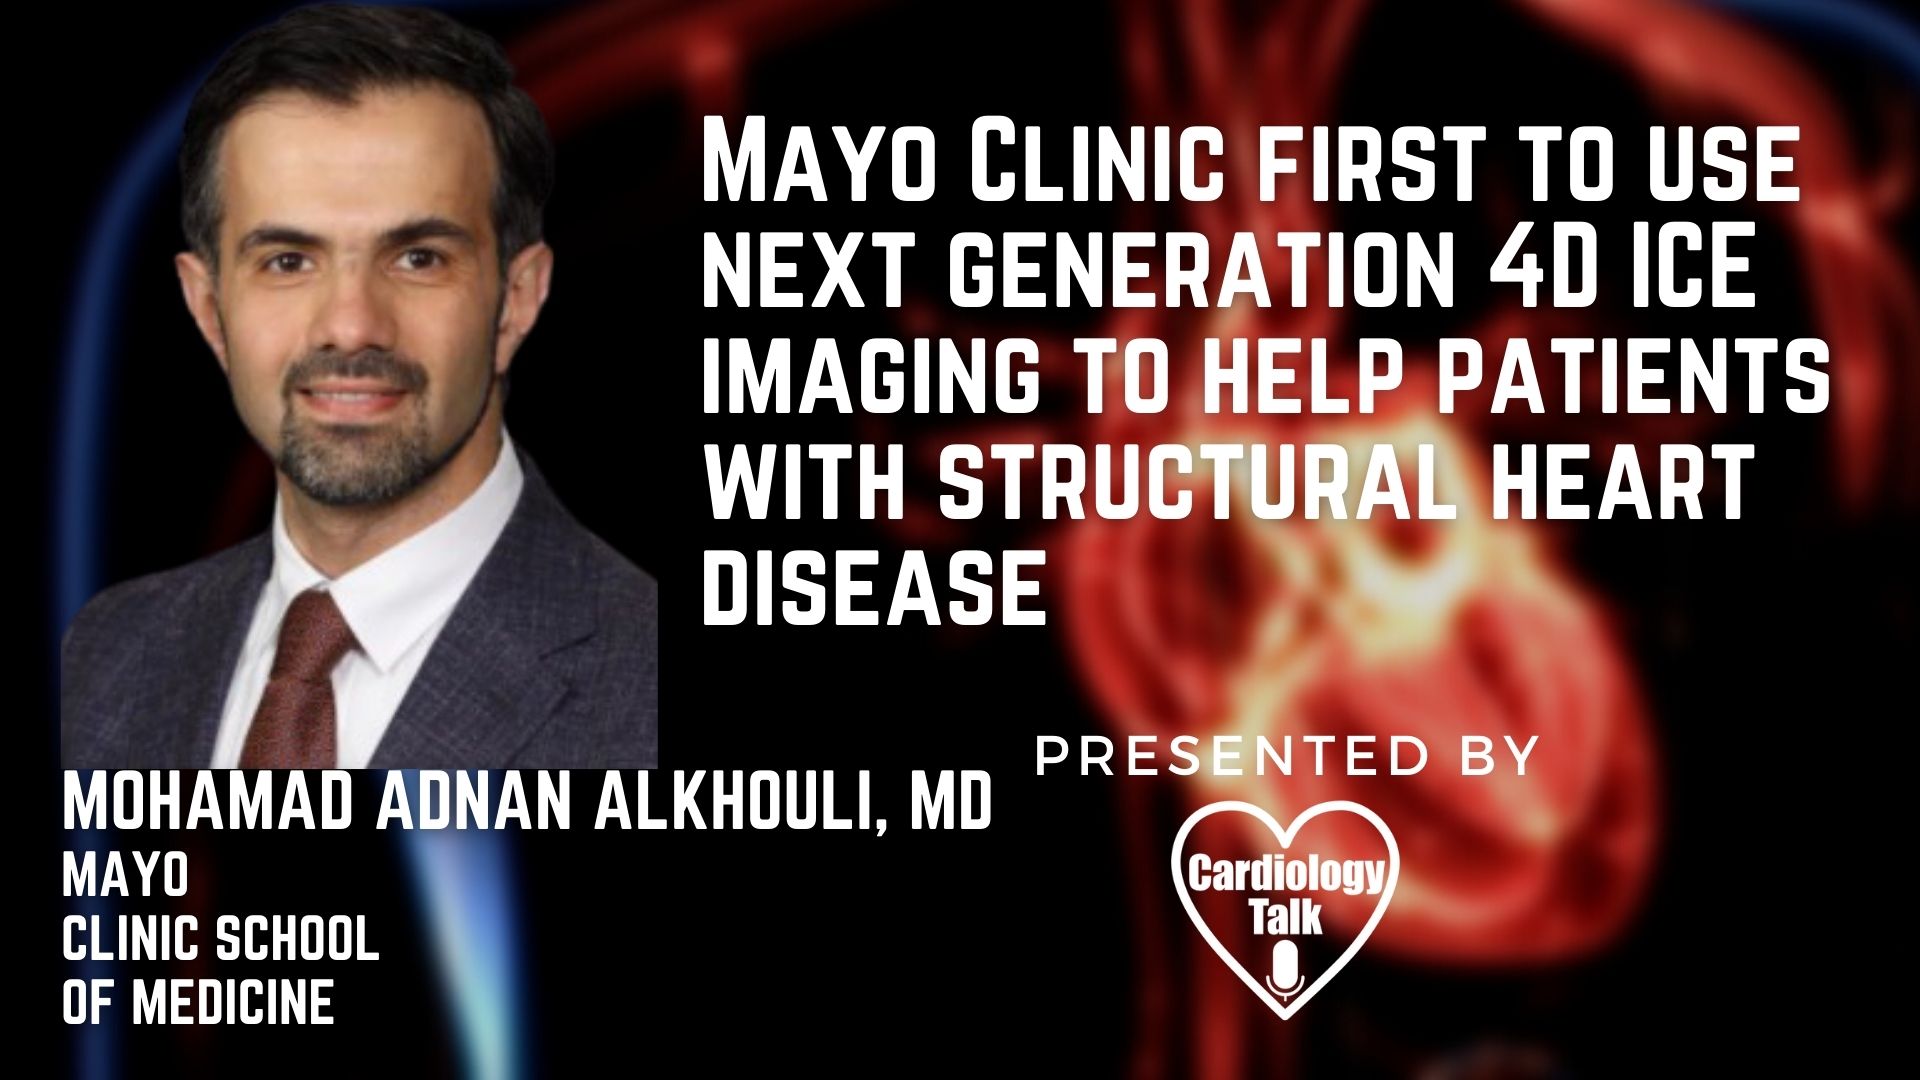 Mohamad Adnan Alkhouli, MD @adnanalkhouli @Mayoclinic @MayoClinicCV #StructuralHeartDisease #HeartDisease #Cardiology #Research Next Generation 4D ICE Imaging To Help Patients With Struct...